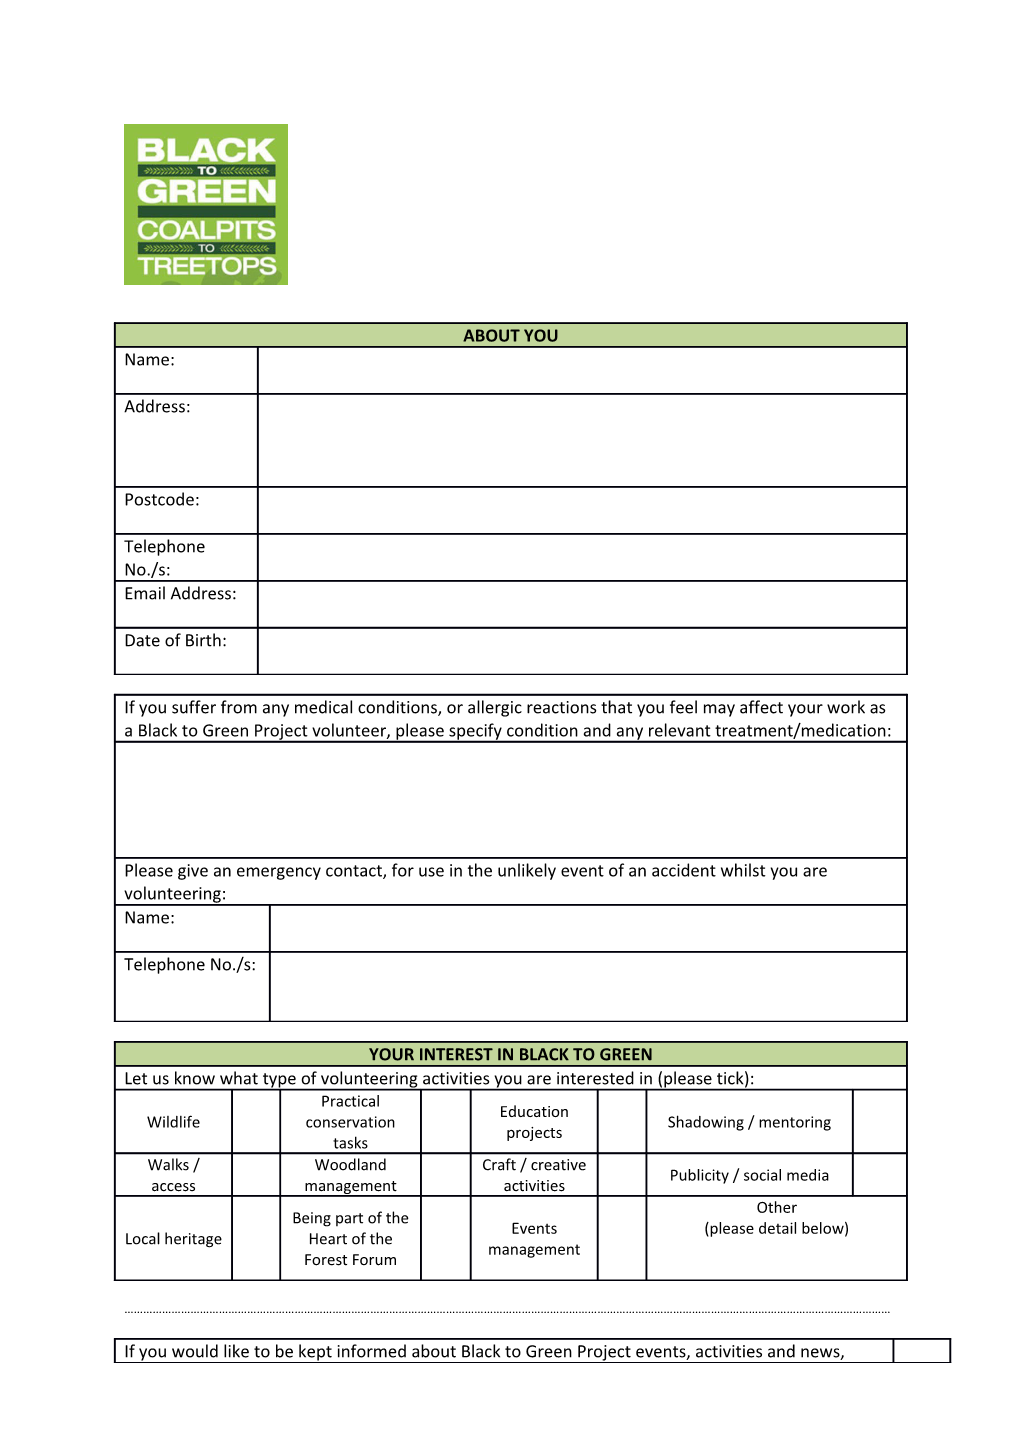 Please Hand This Form to the Black to Green Team Or Return It To